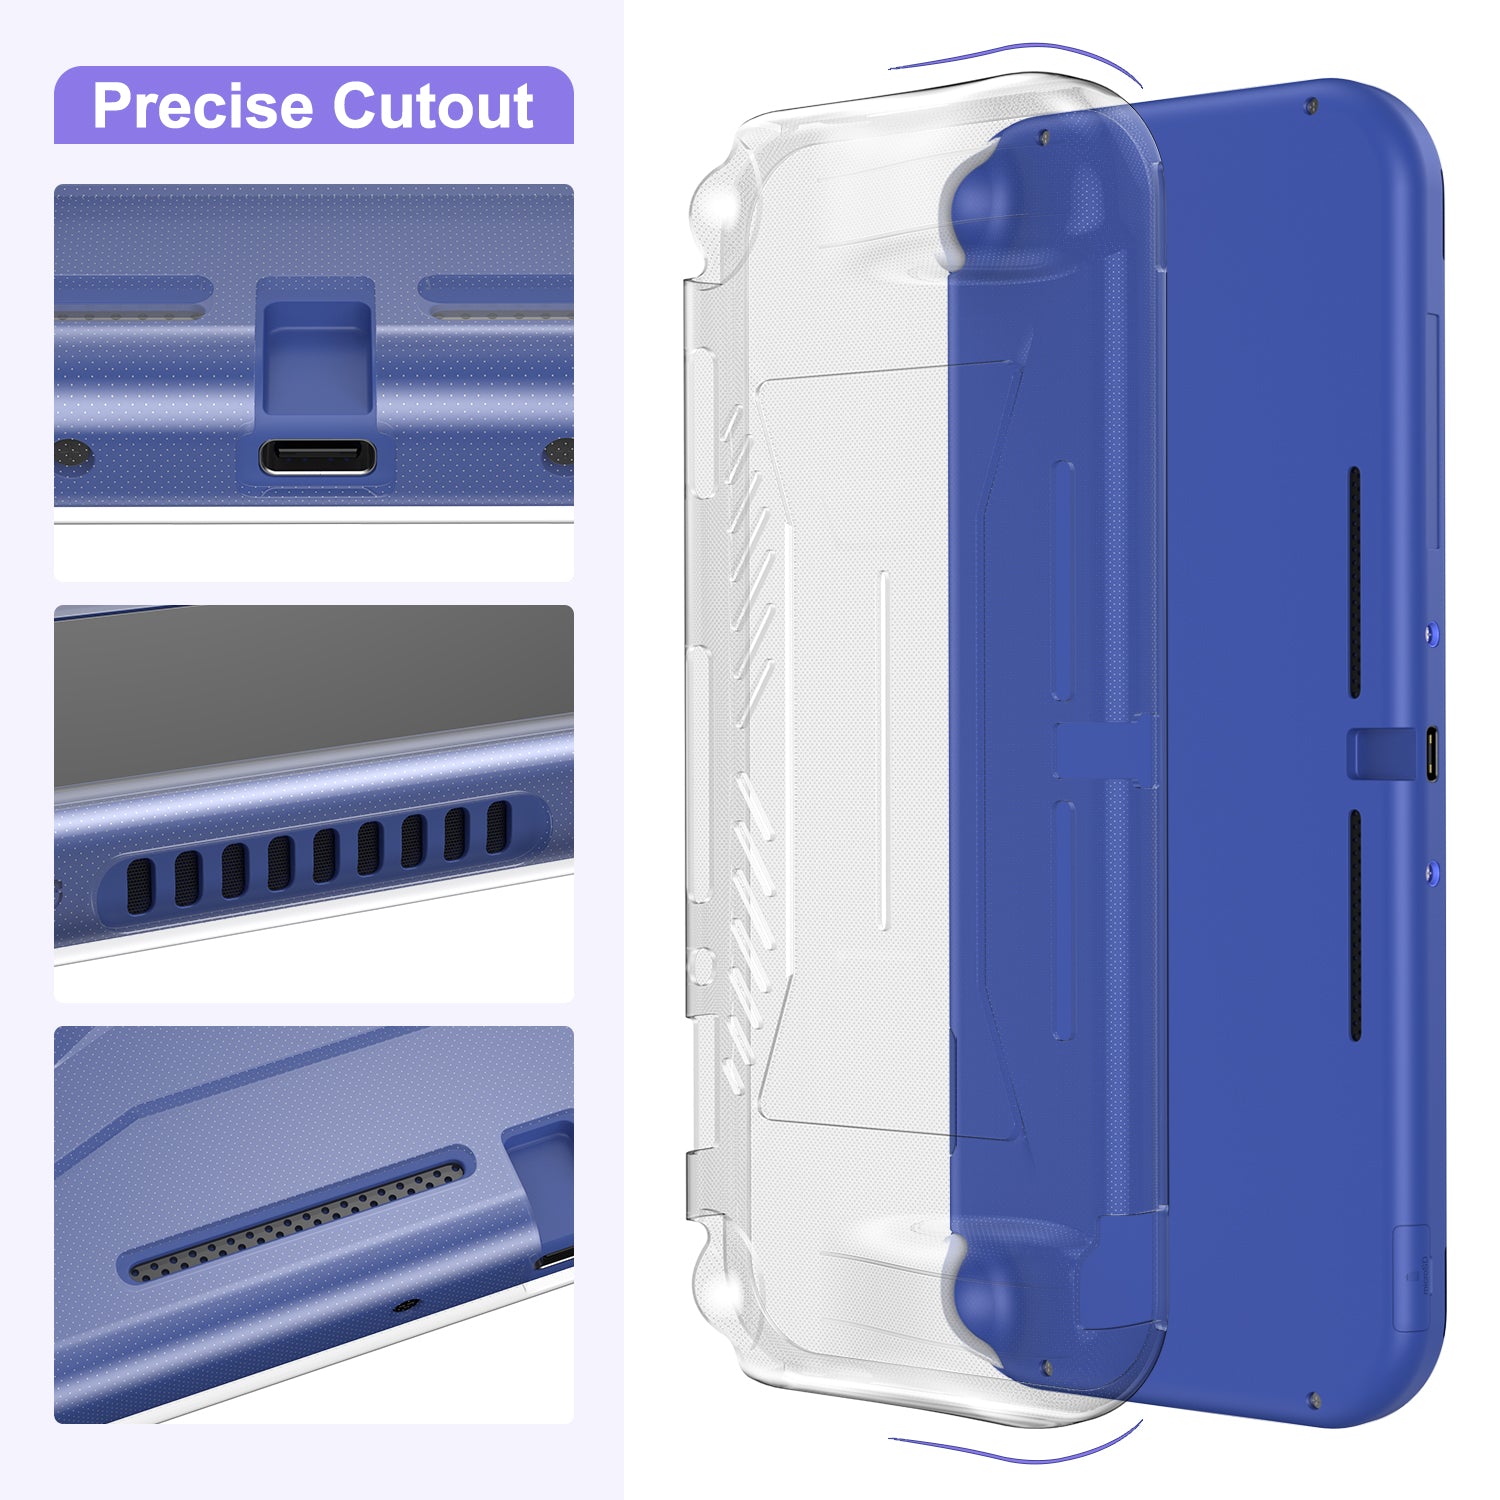 innoAura Switch Lite Carrying Case, Protective Case for Switch Lite